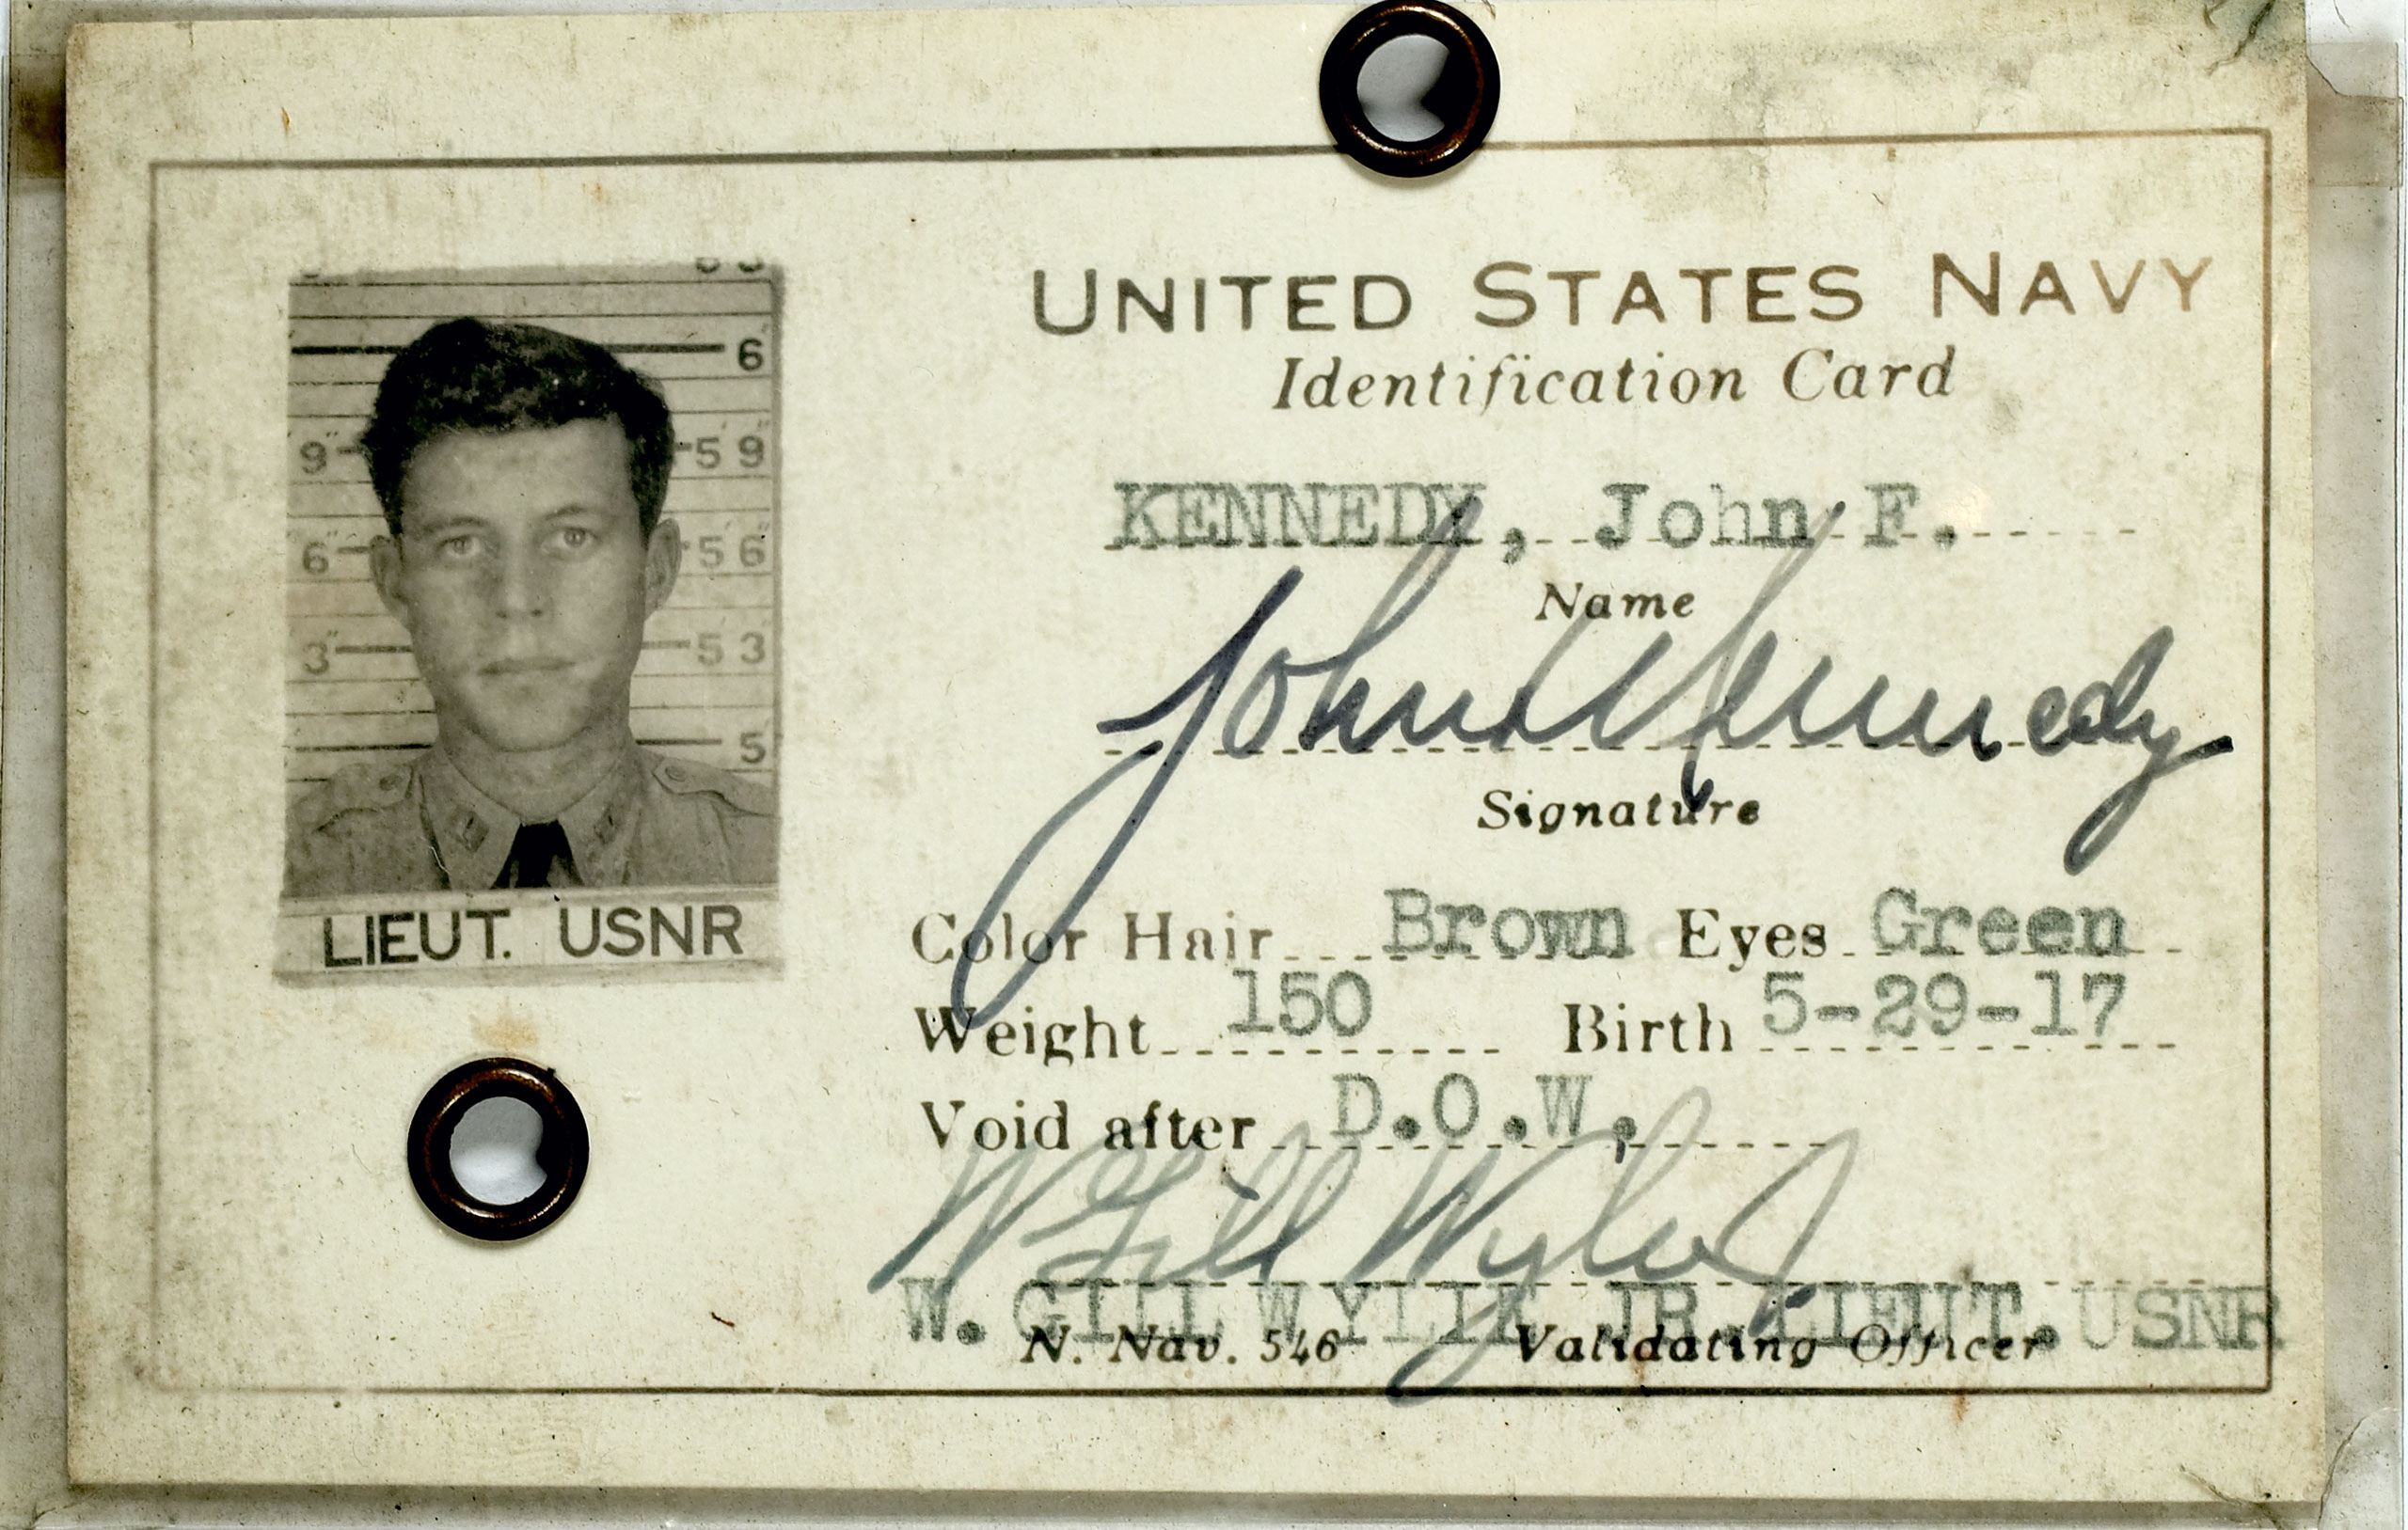 United States Navy identification card for John F. Kennedy.